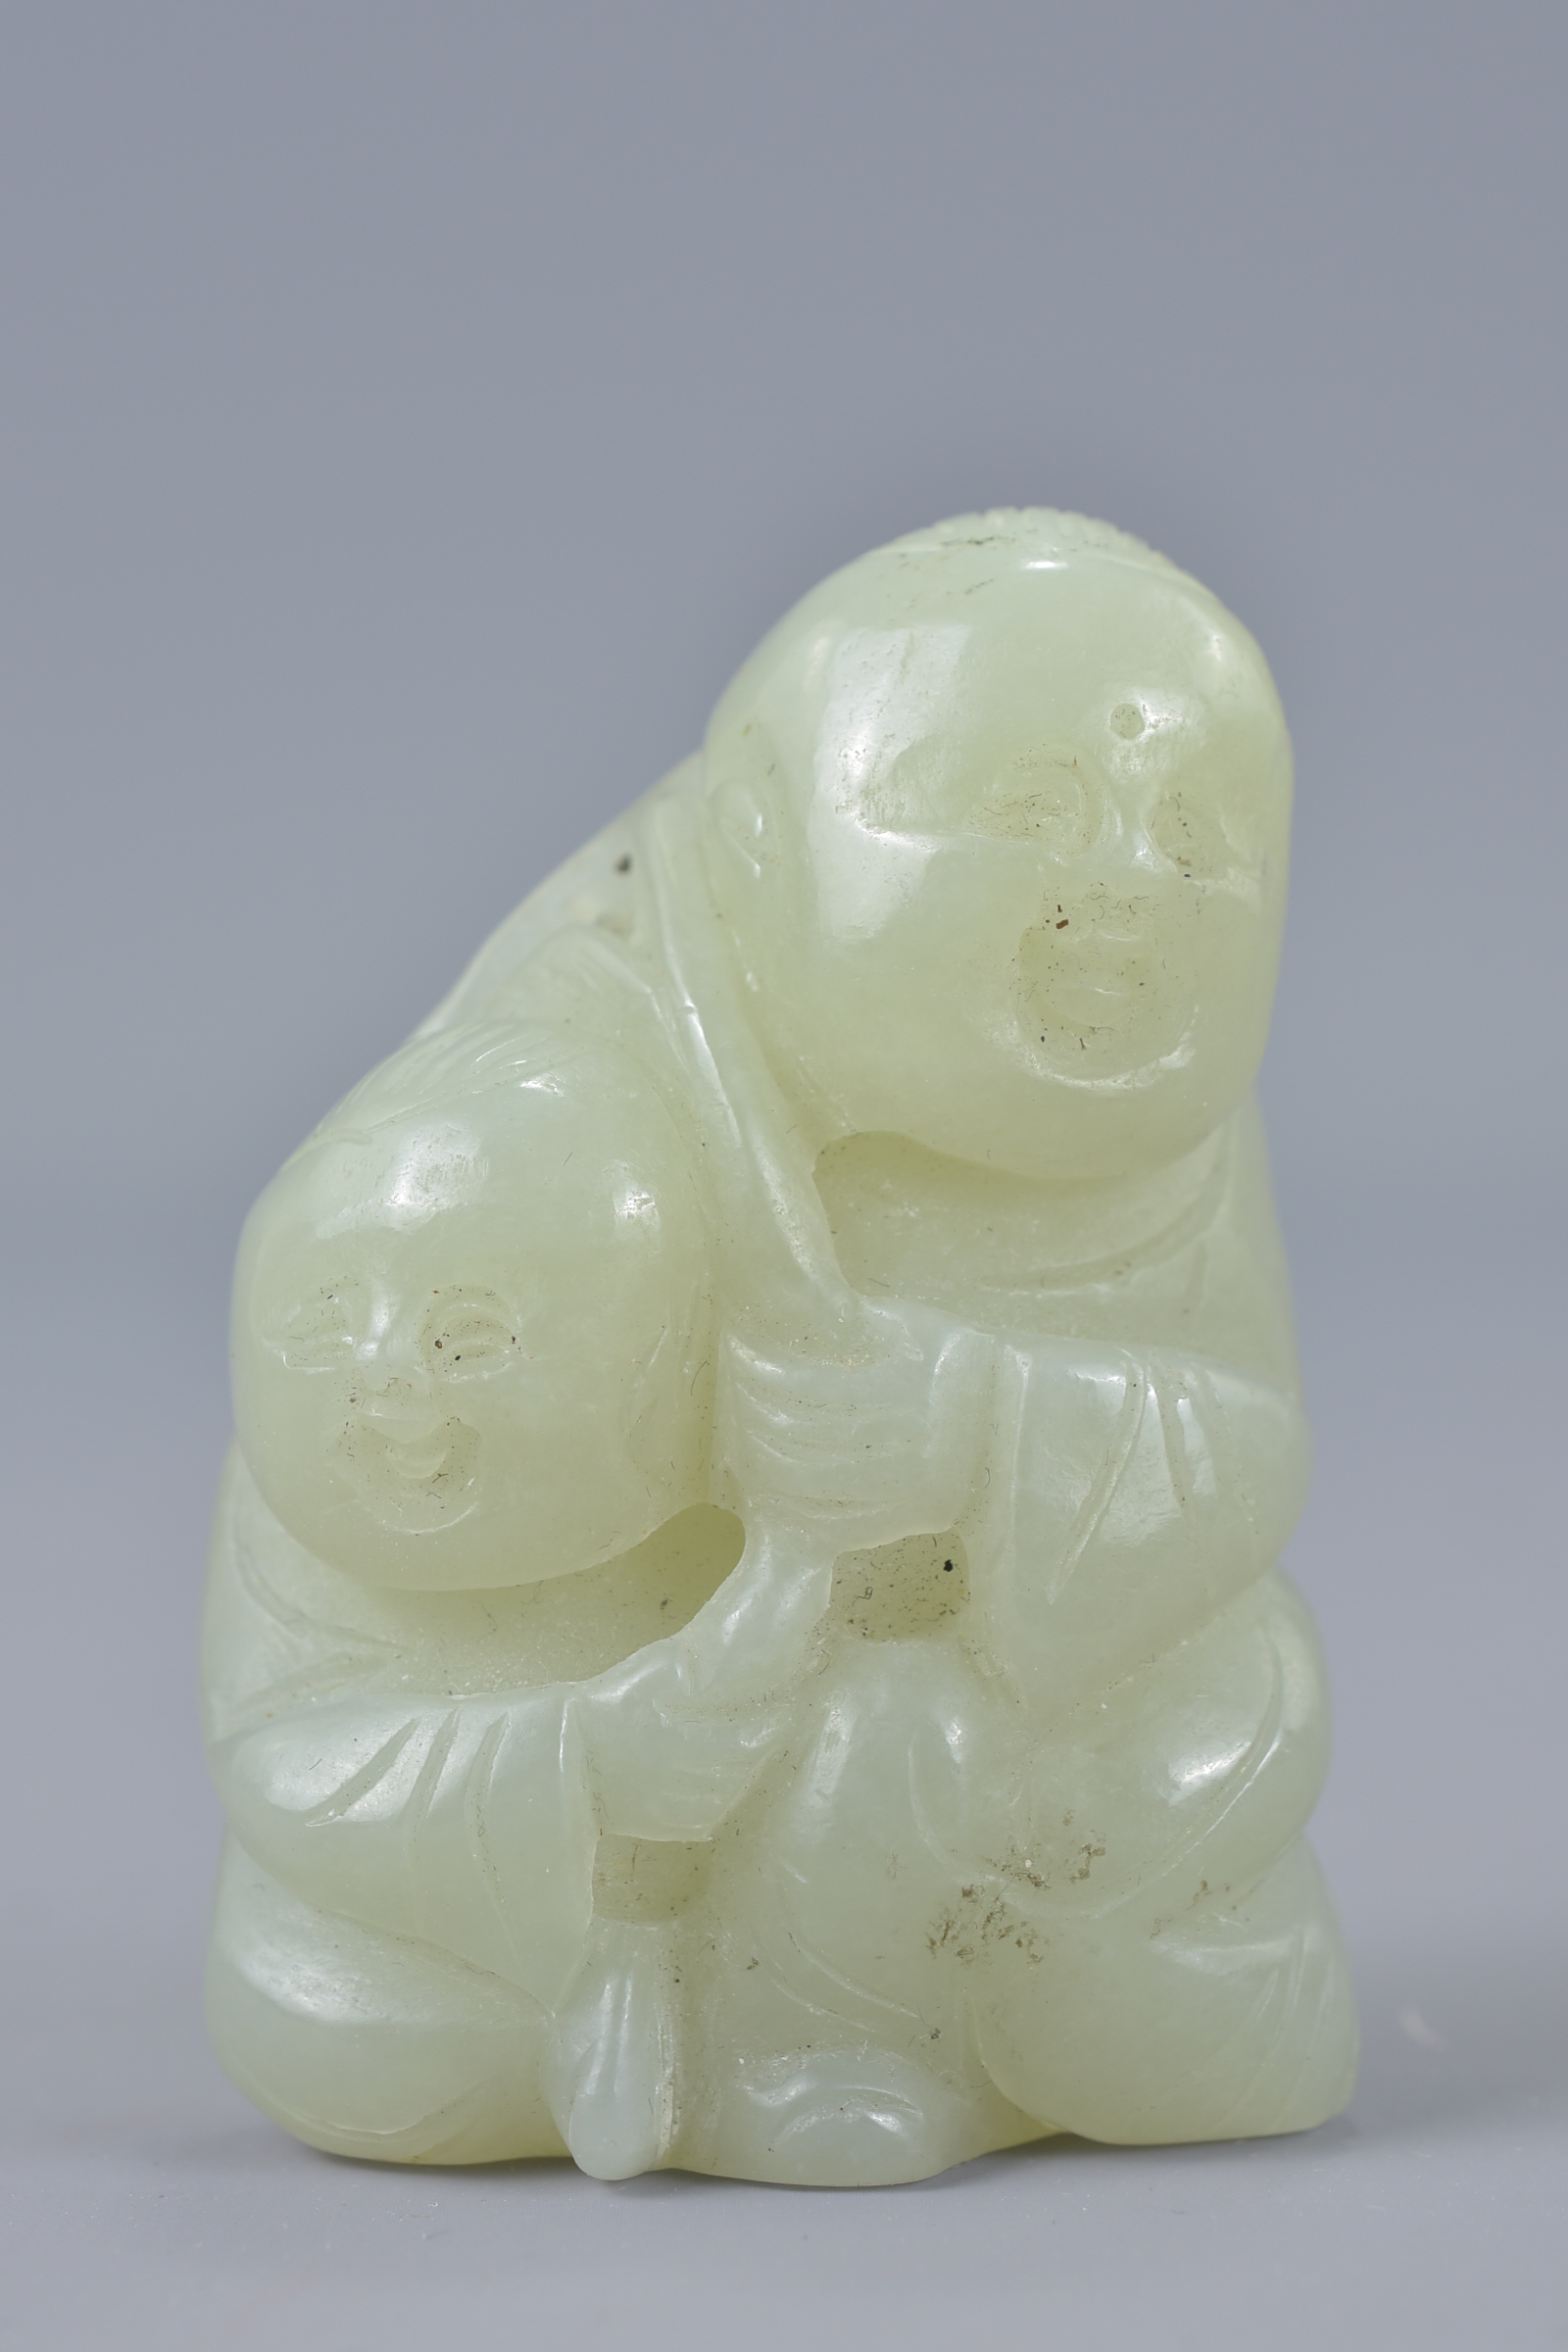 A Chinese 19/20th century pale celadon jade carving of two boys. Size 5.7cm tall x 3.8cm wide